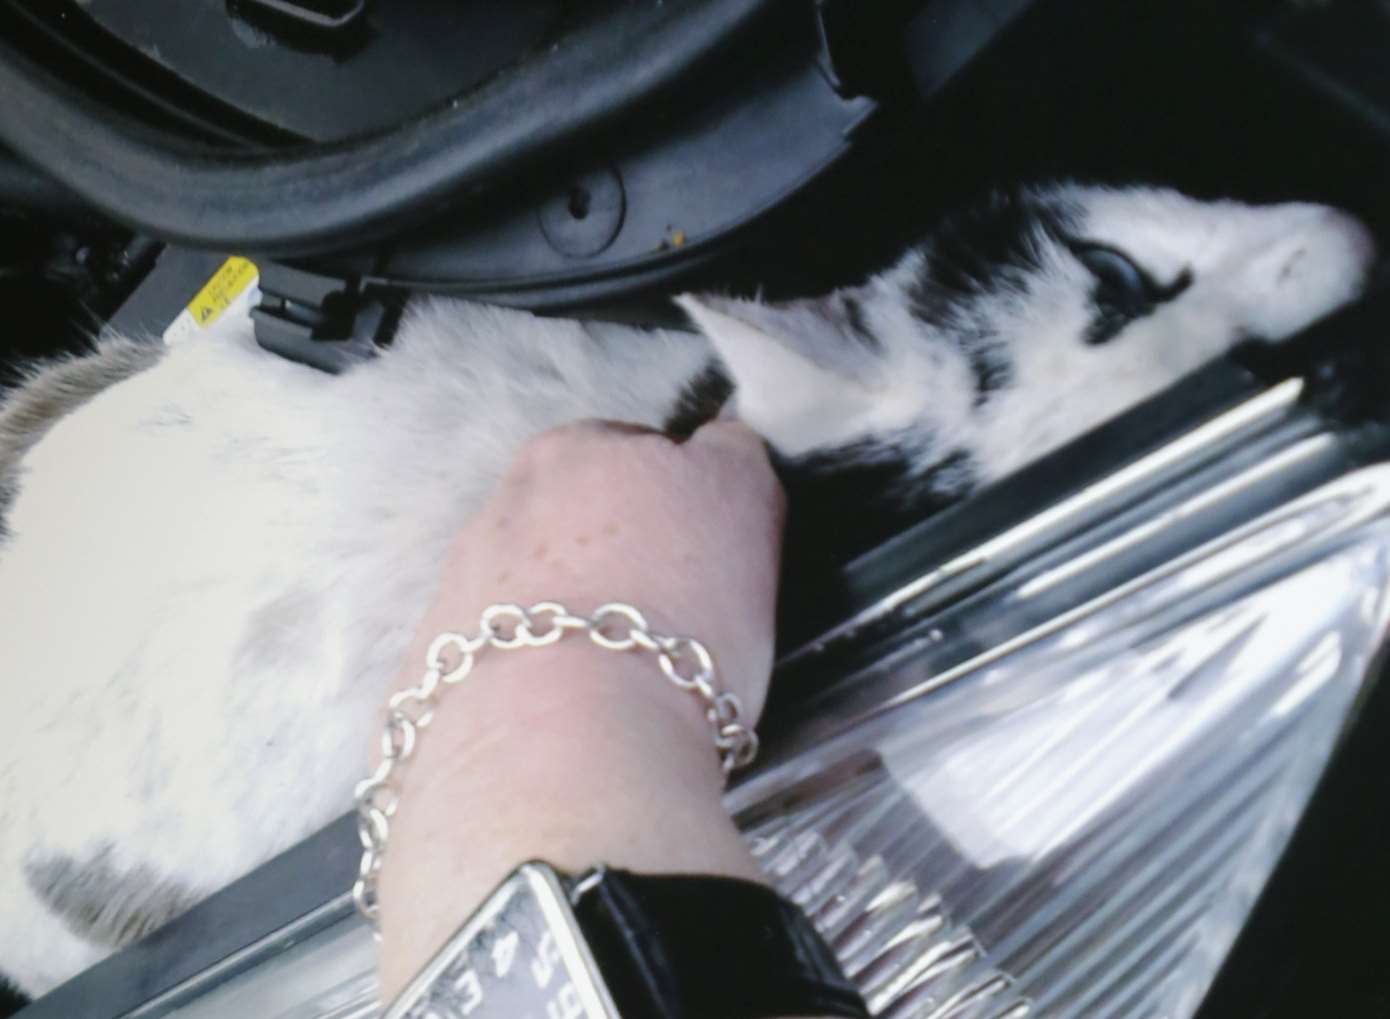 Mechanics were called to free Timmy from the engine. Picture: Jane Butcher